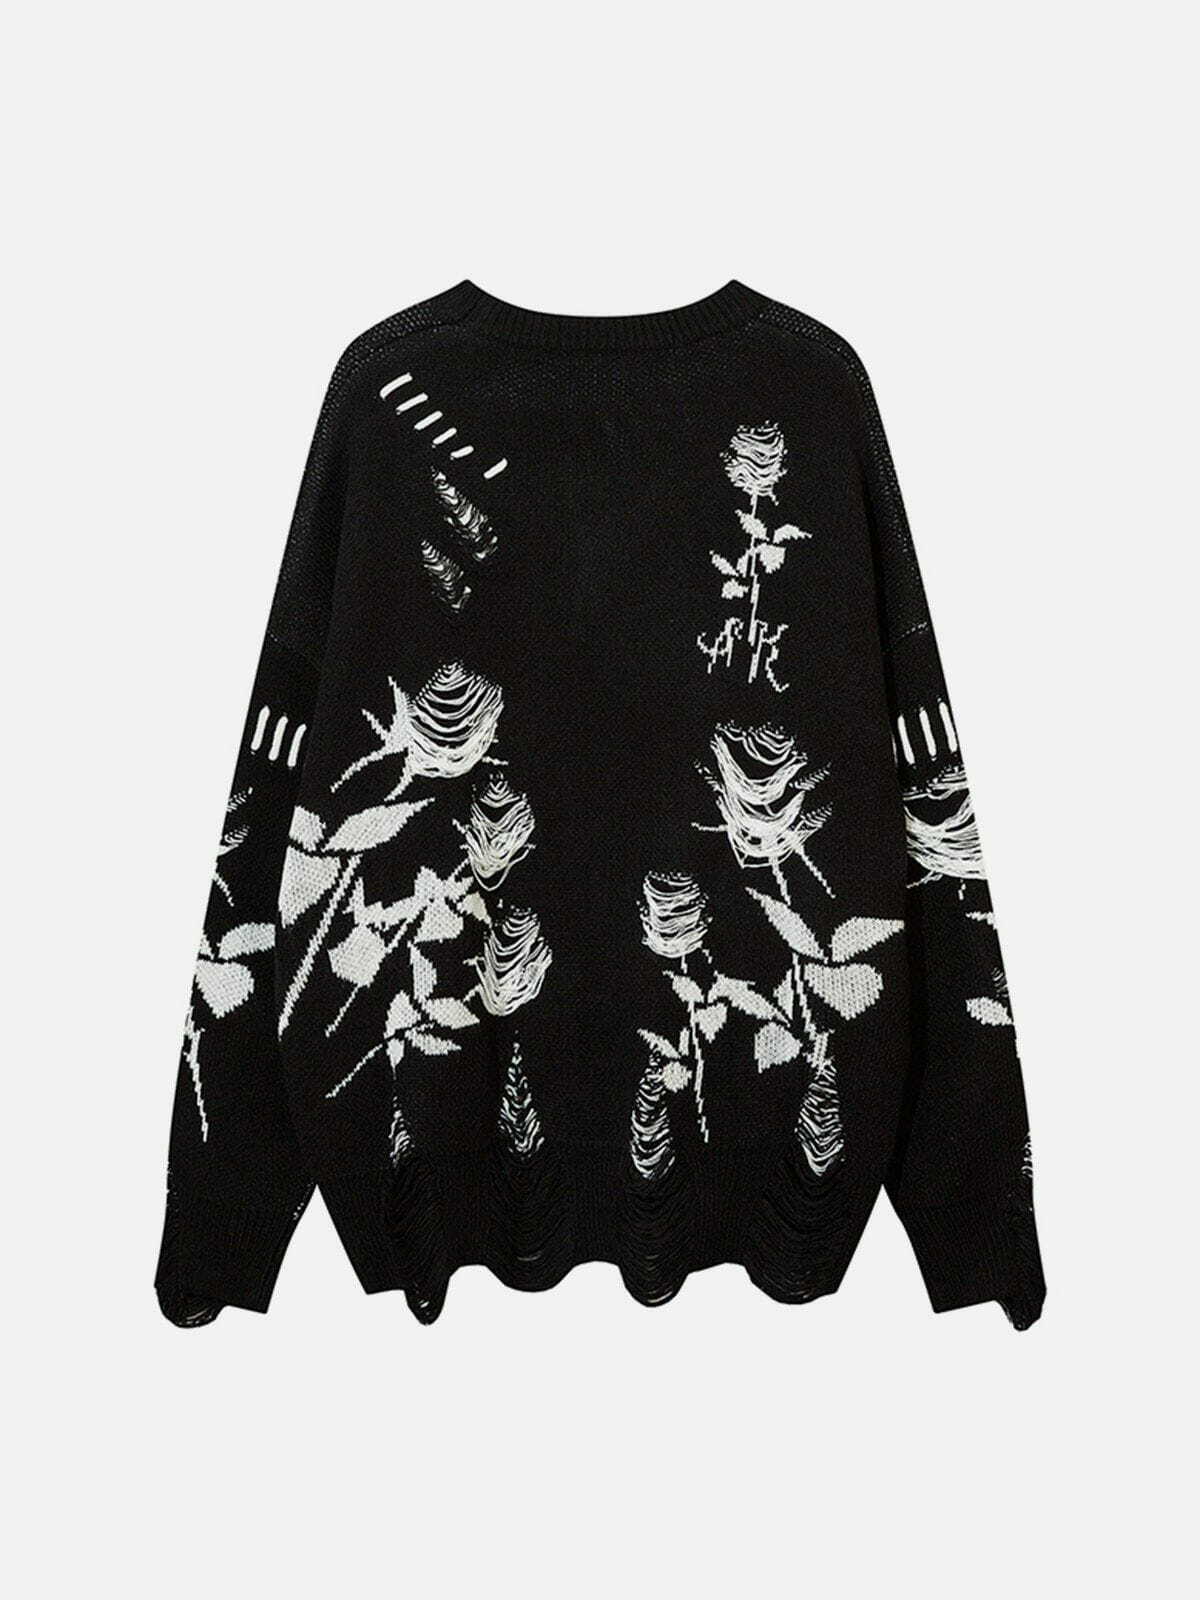 raw edge rose sweater quirky floral streetwear 4879